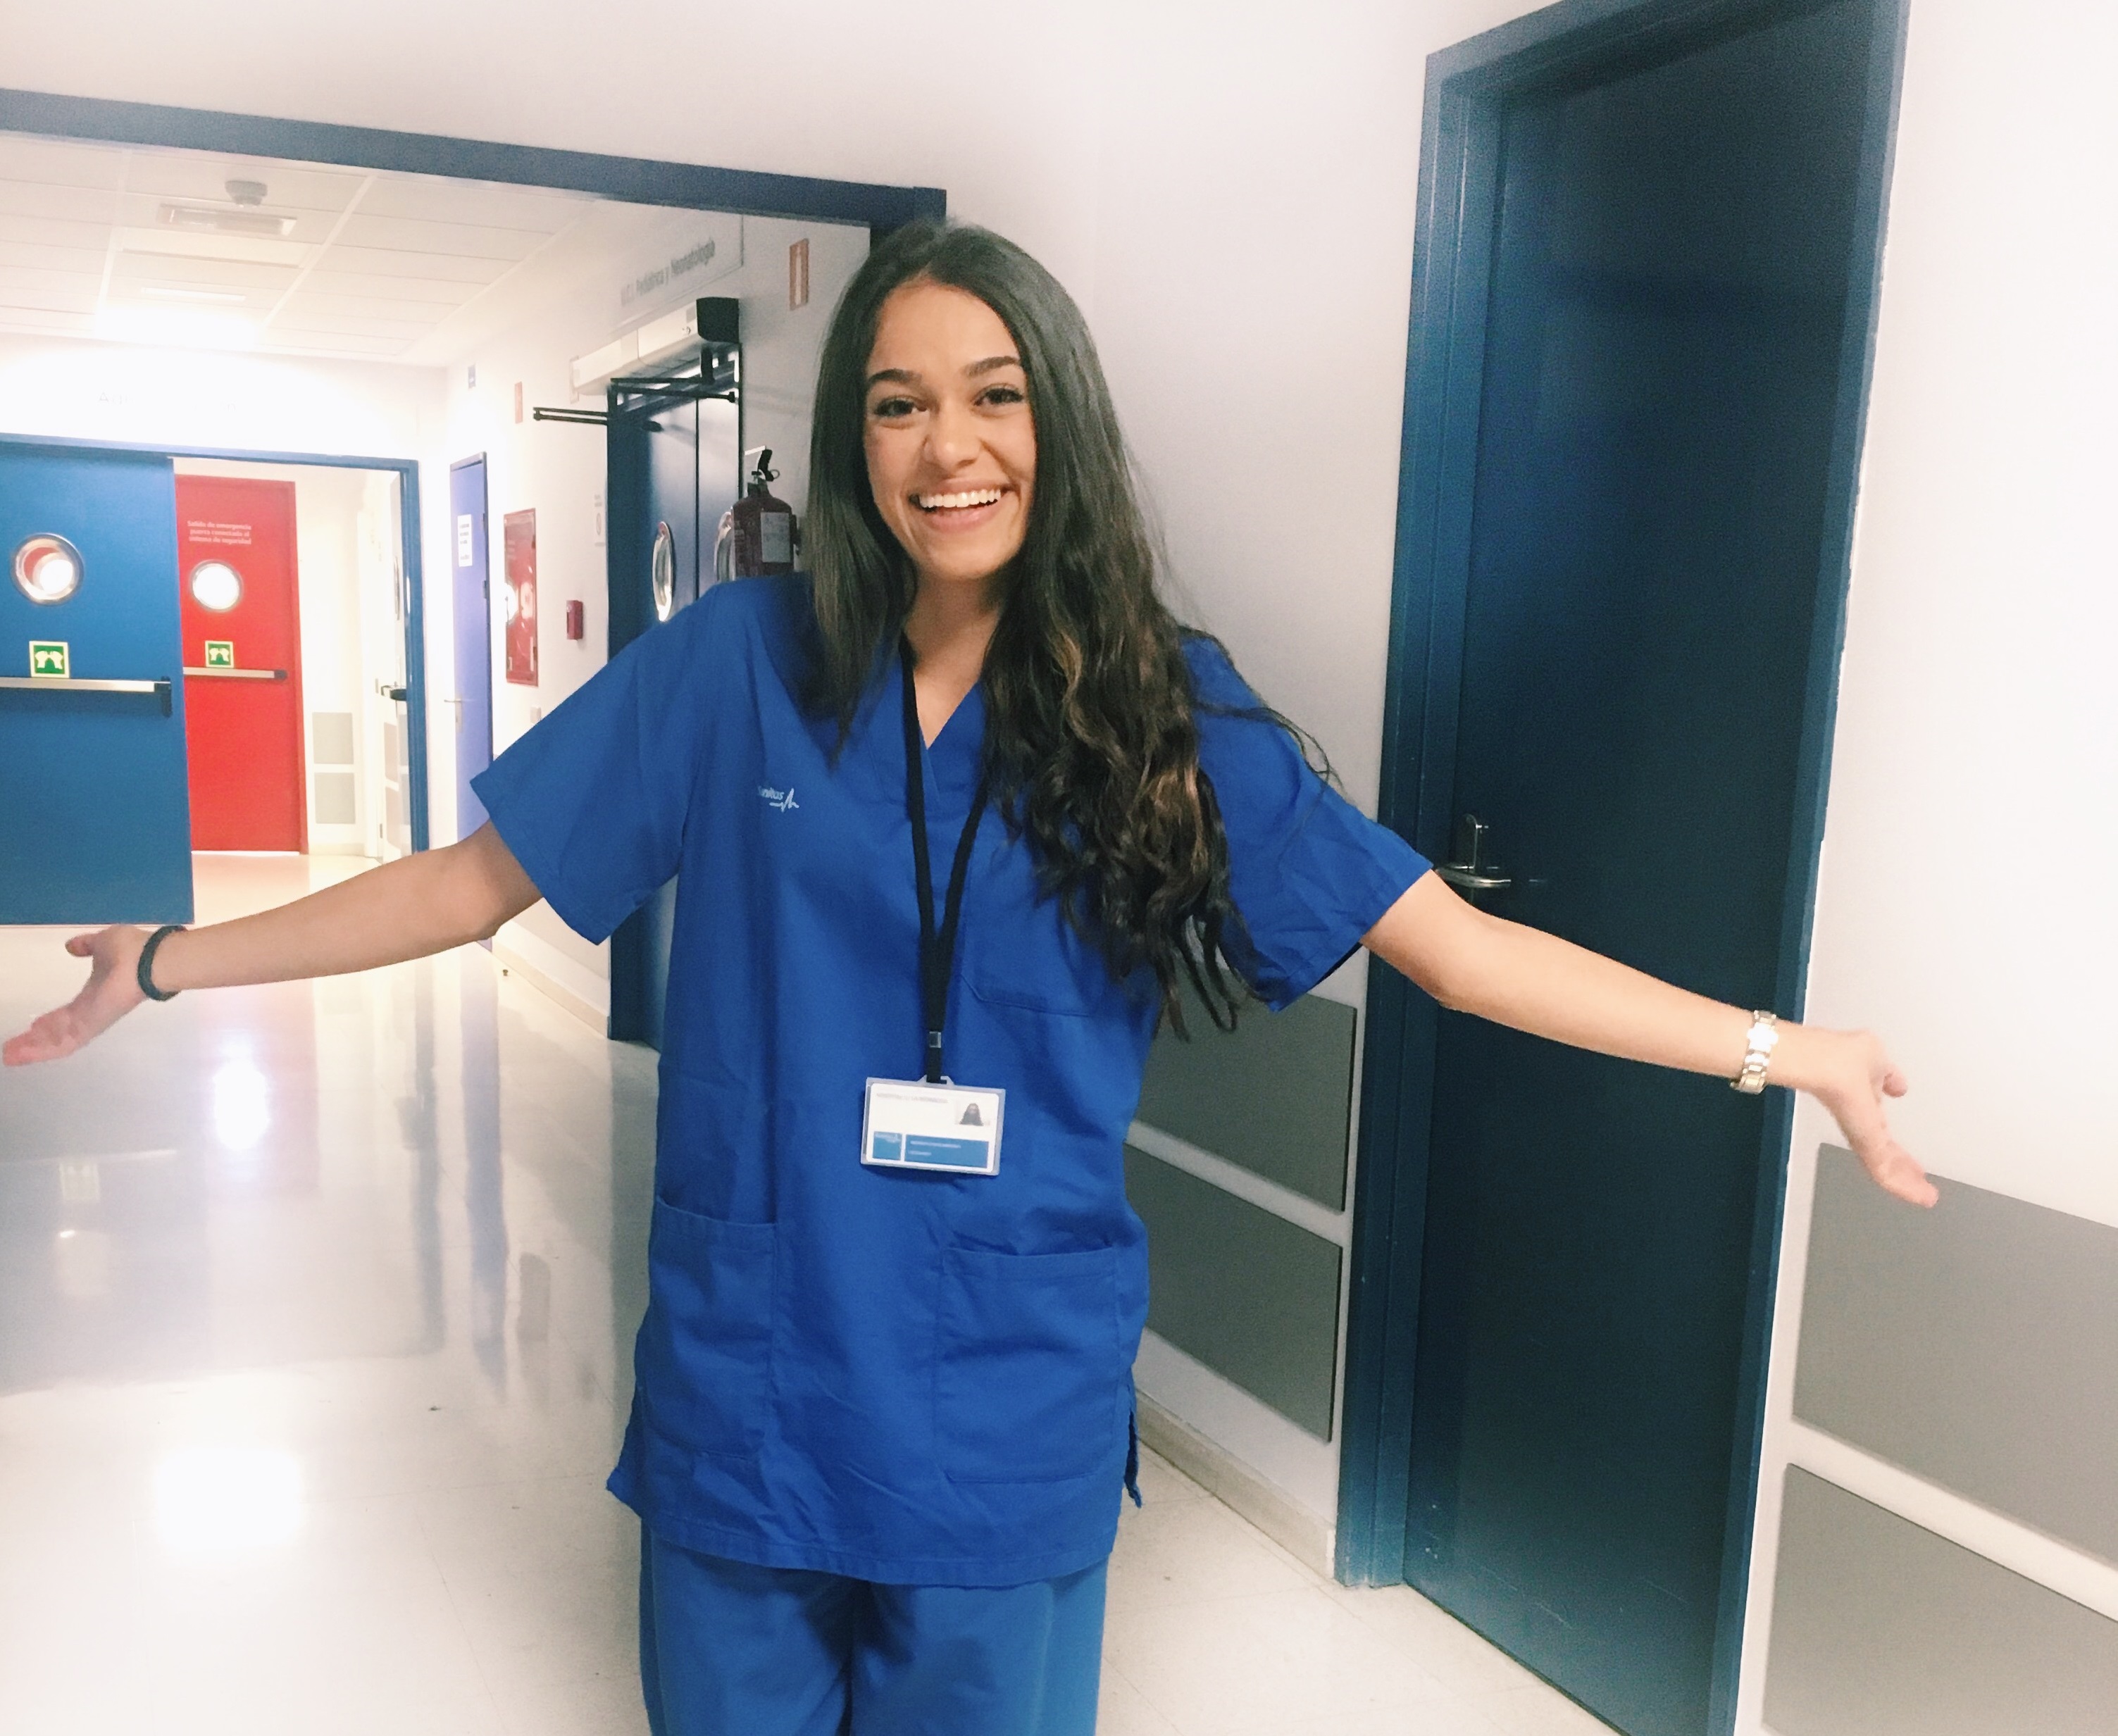 Female student in medical scrubs in a hospital building